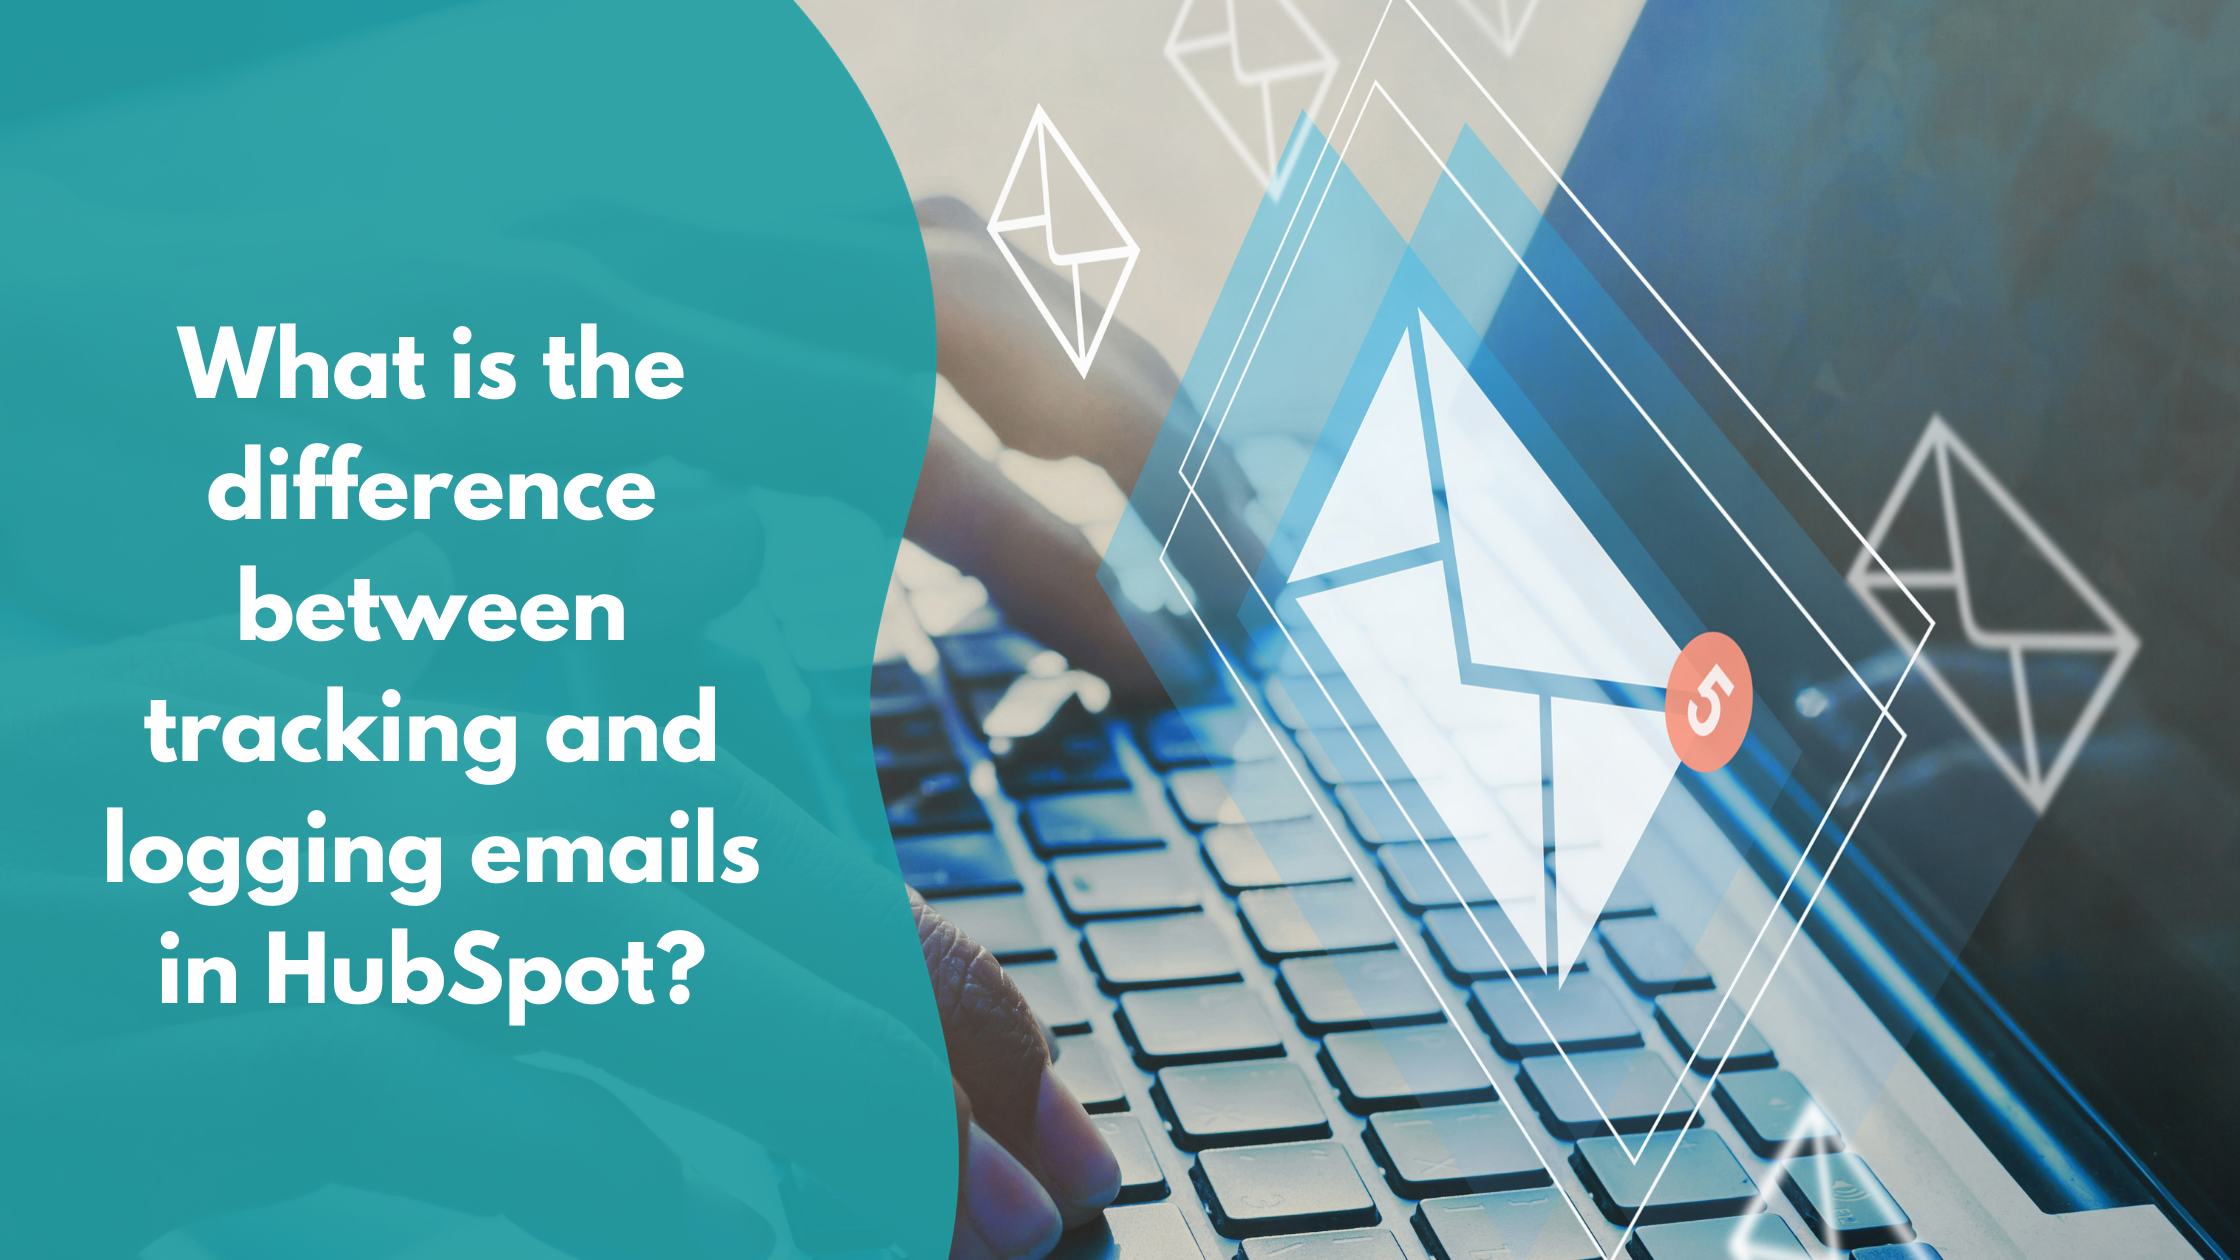 What is the difference between tracking and logging emails in HubSpot?